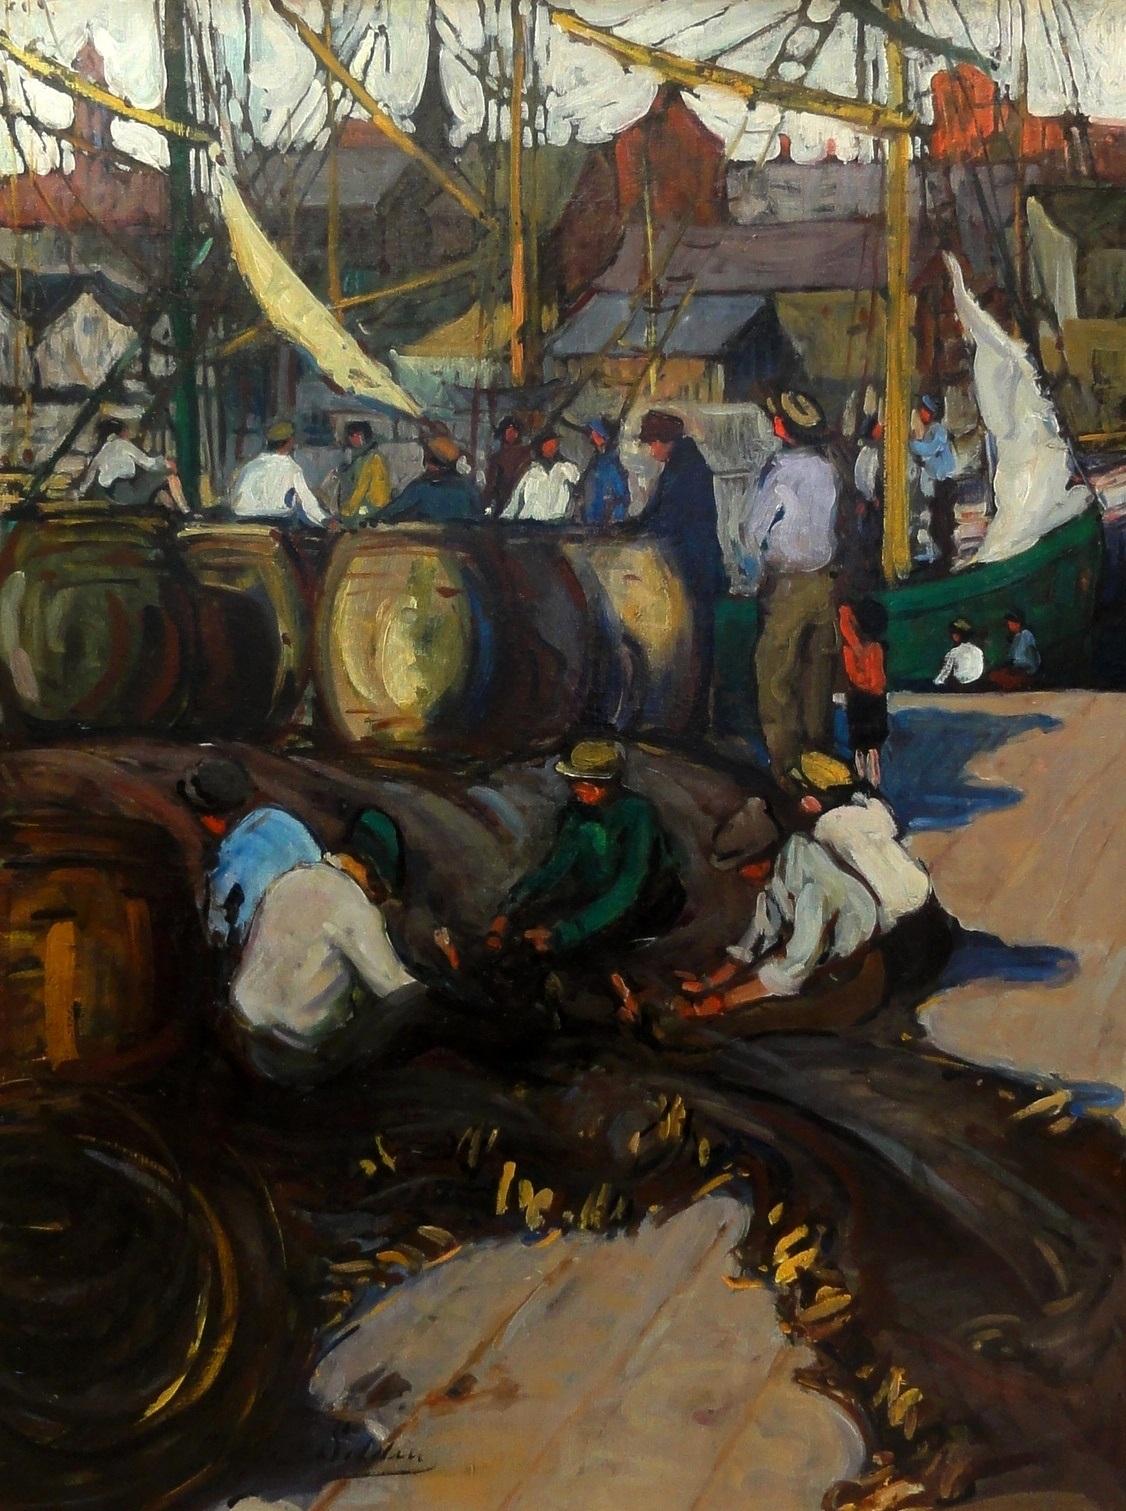 Mending Nets - Painting by Dixie Selden